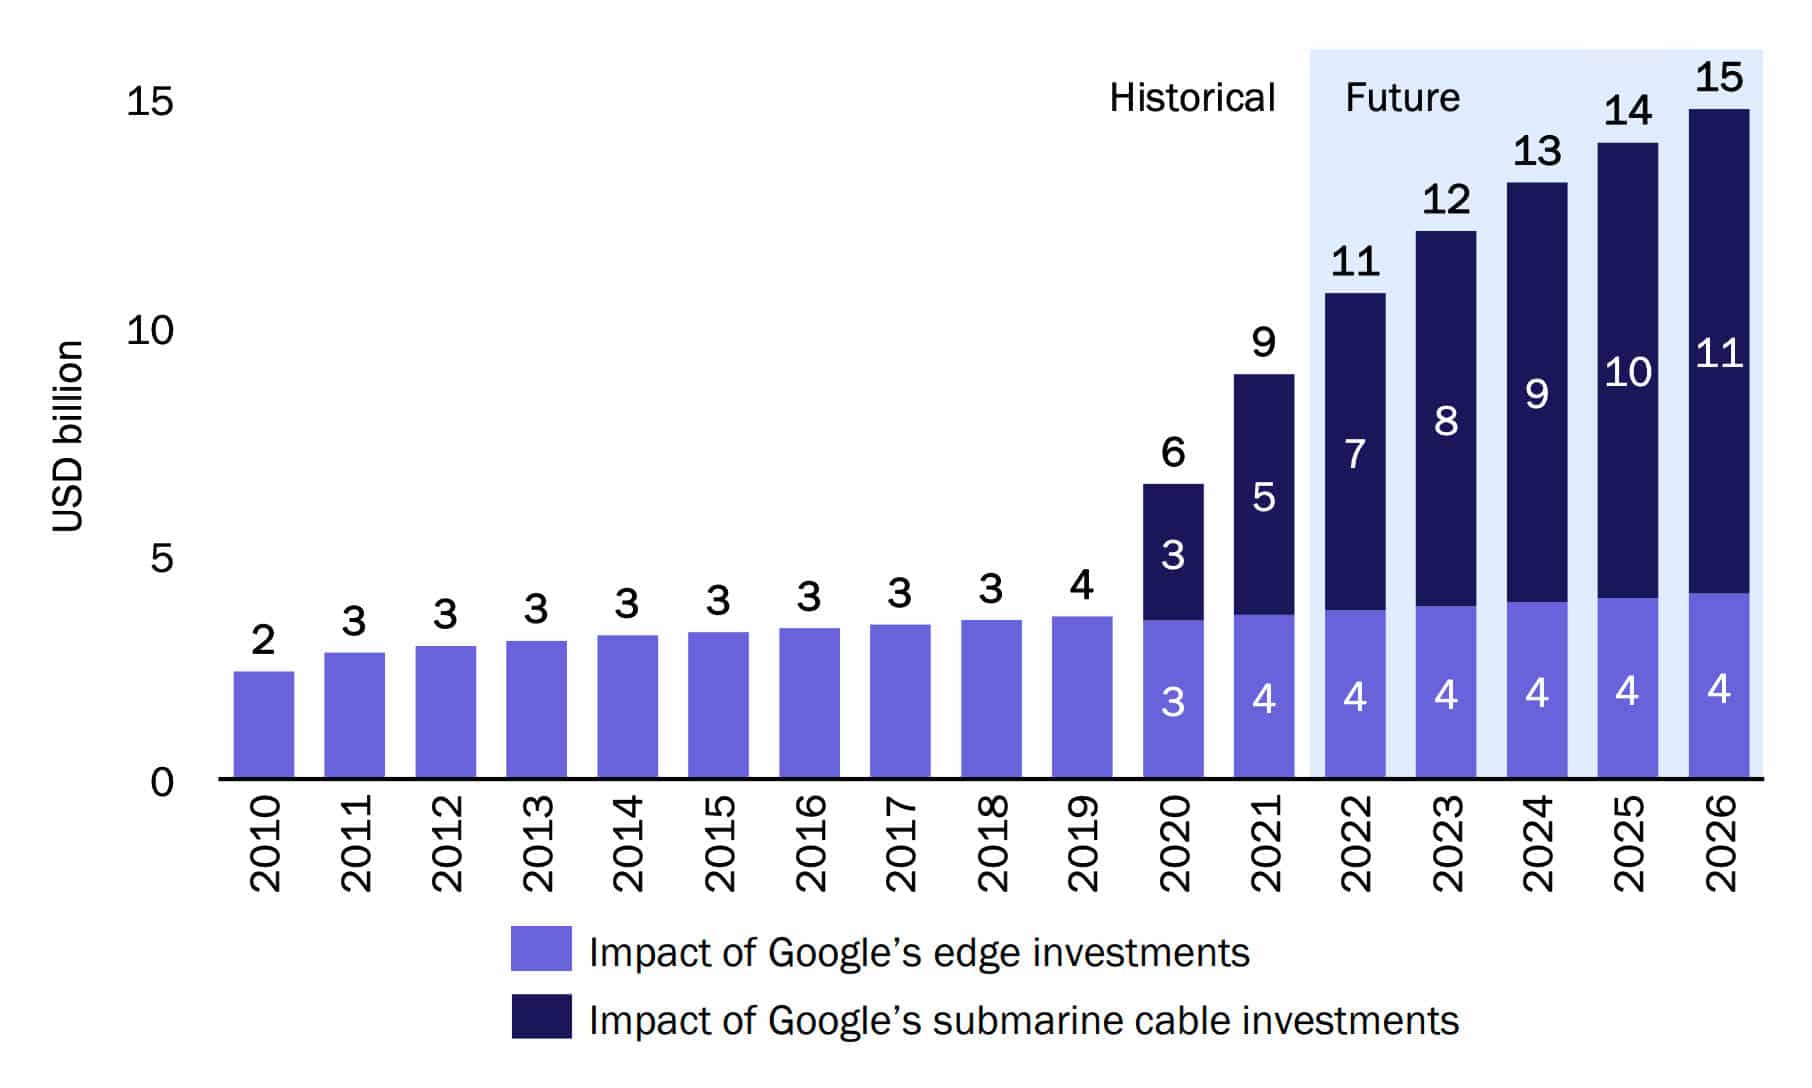 GDP growth attributable to Google's network infrastructure investments in Australia